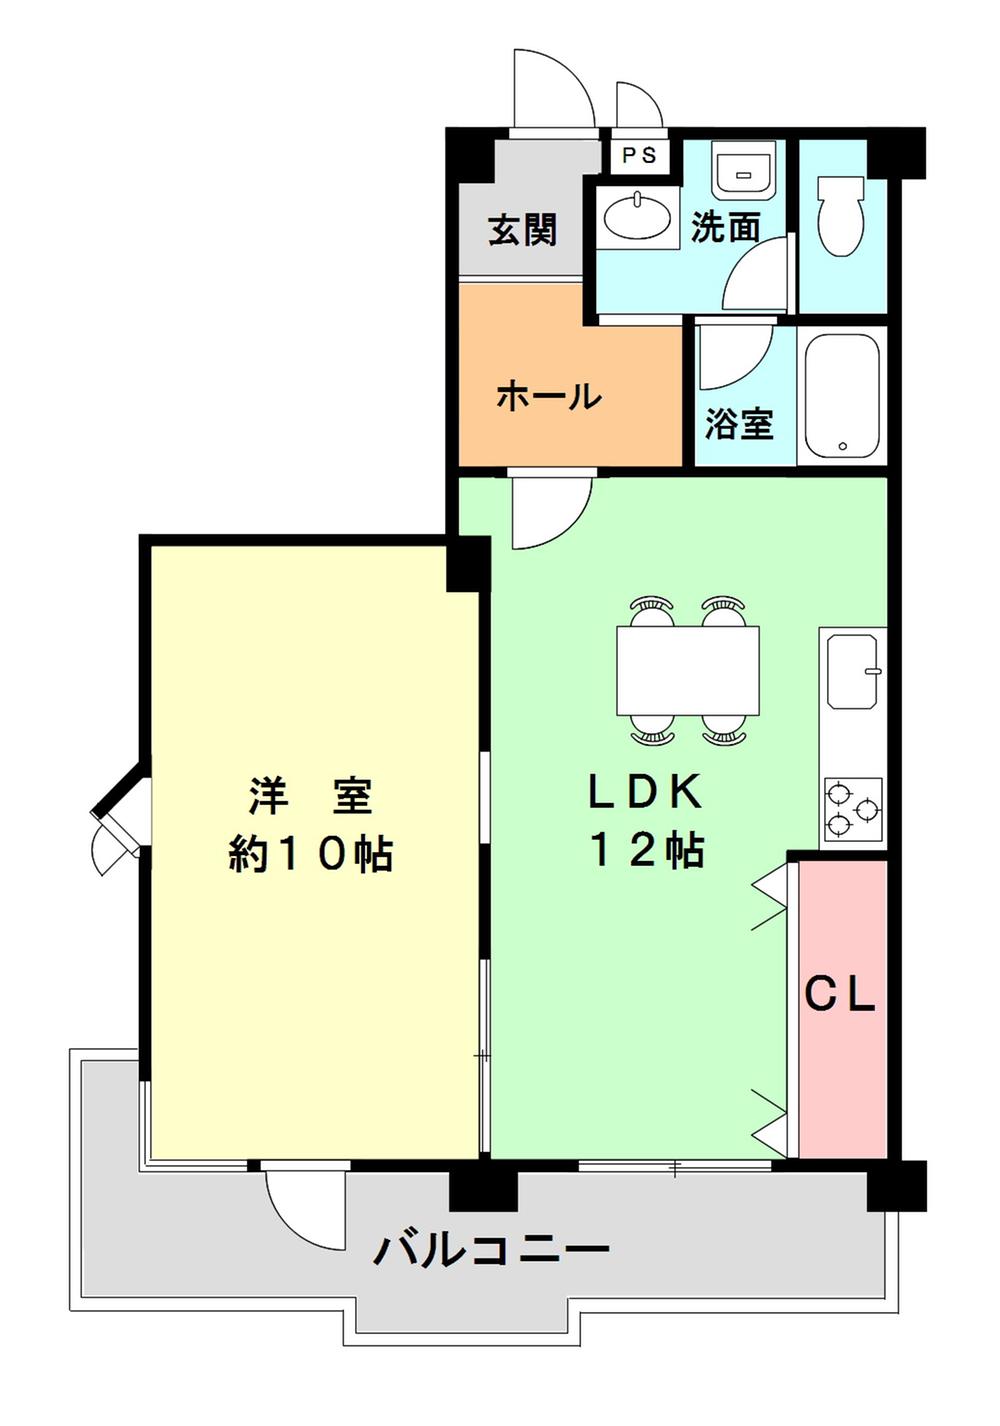 Floor plan. 1LDK, Price 8.3 million yen, Occupied area 50.29 sq m , Perfect as a balcony area 9.75 sq m income-producing properties.